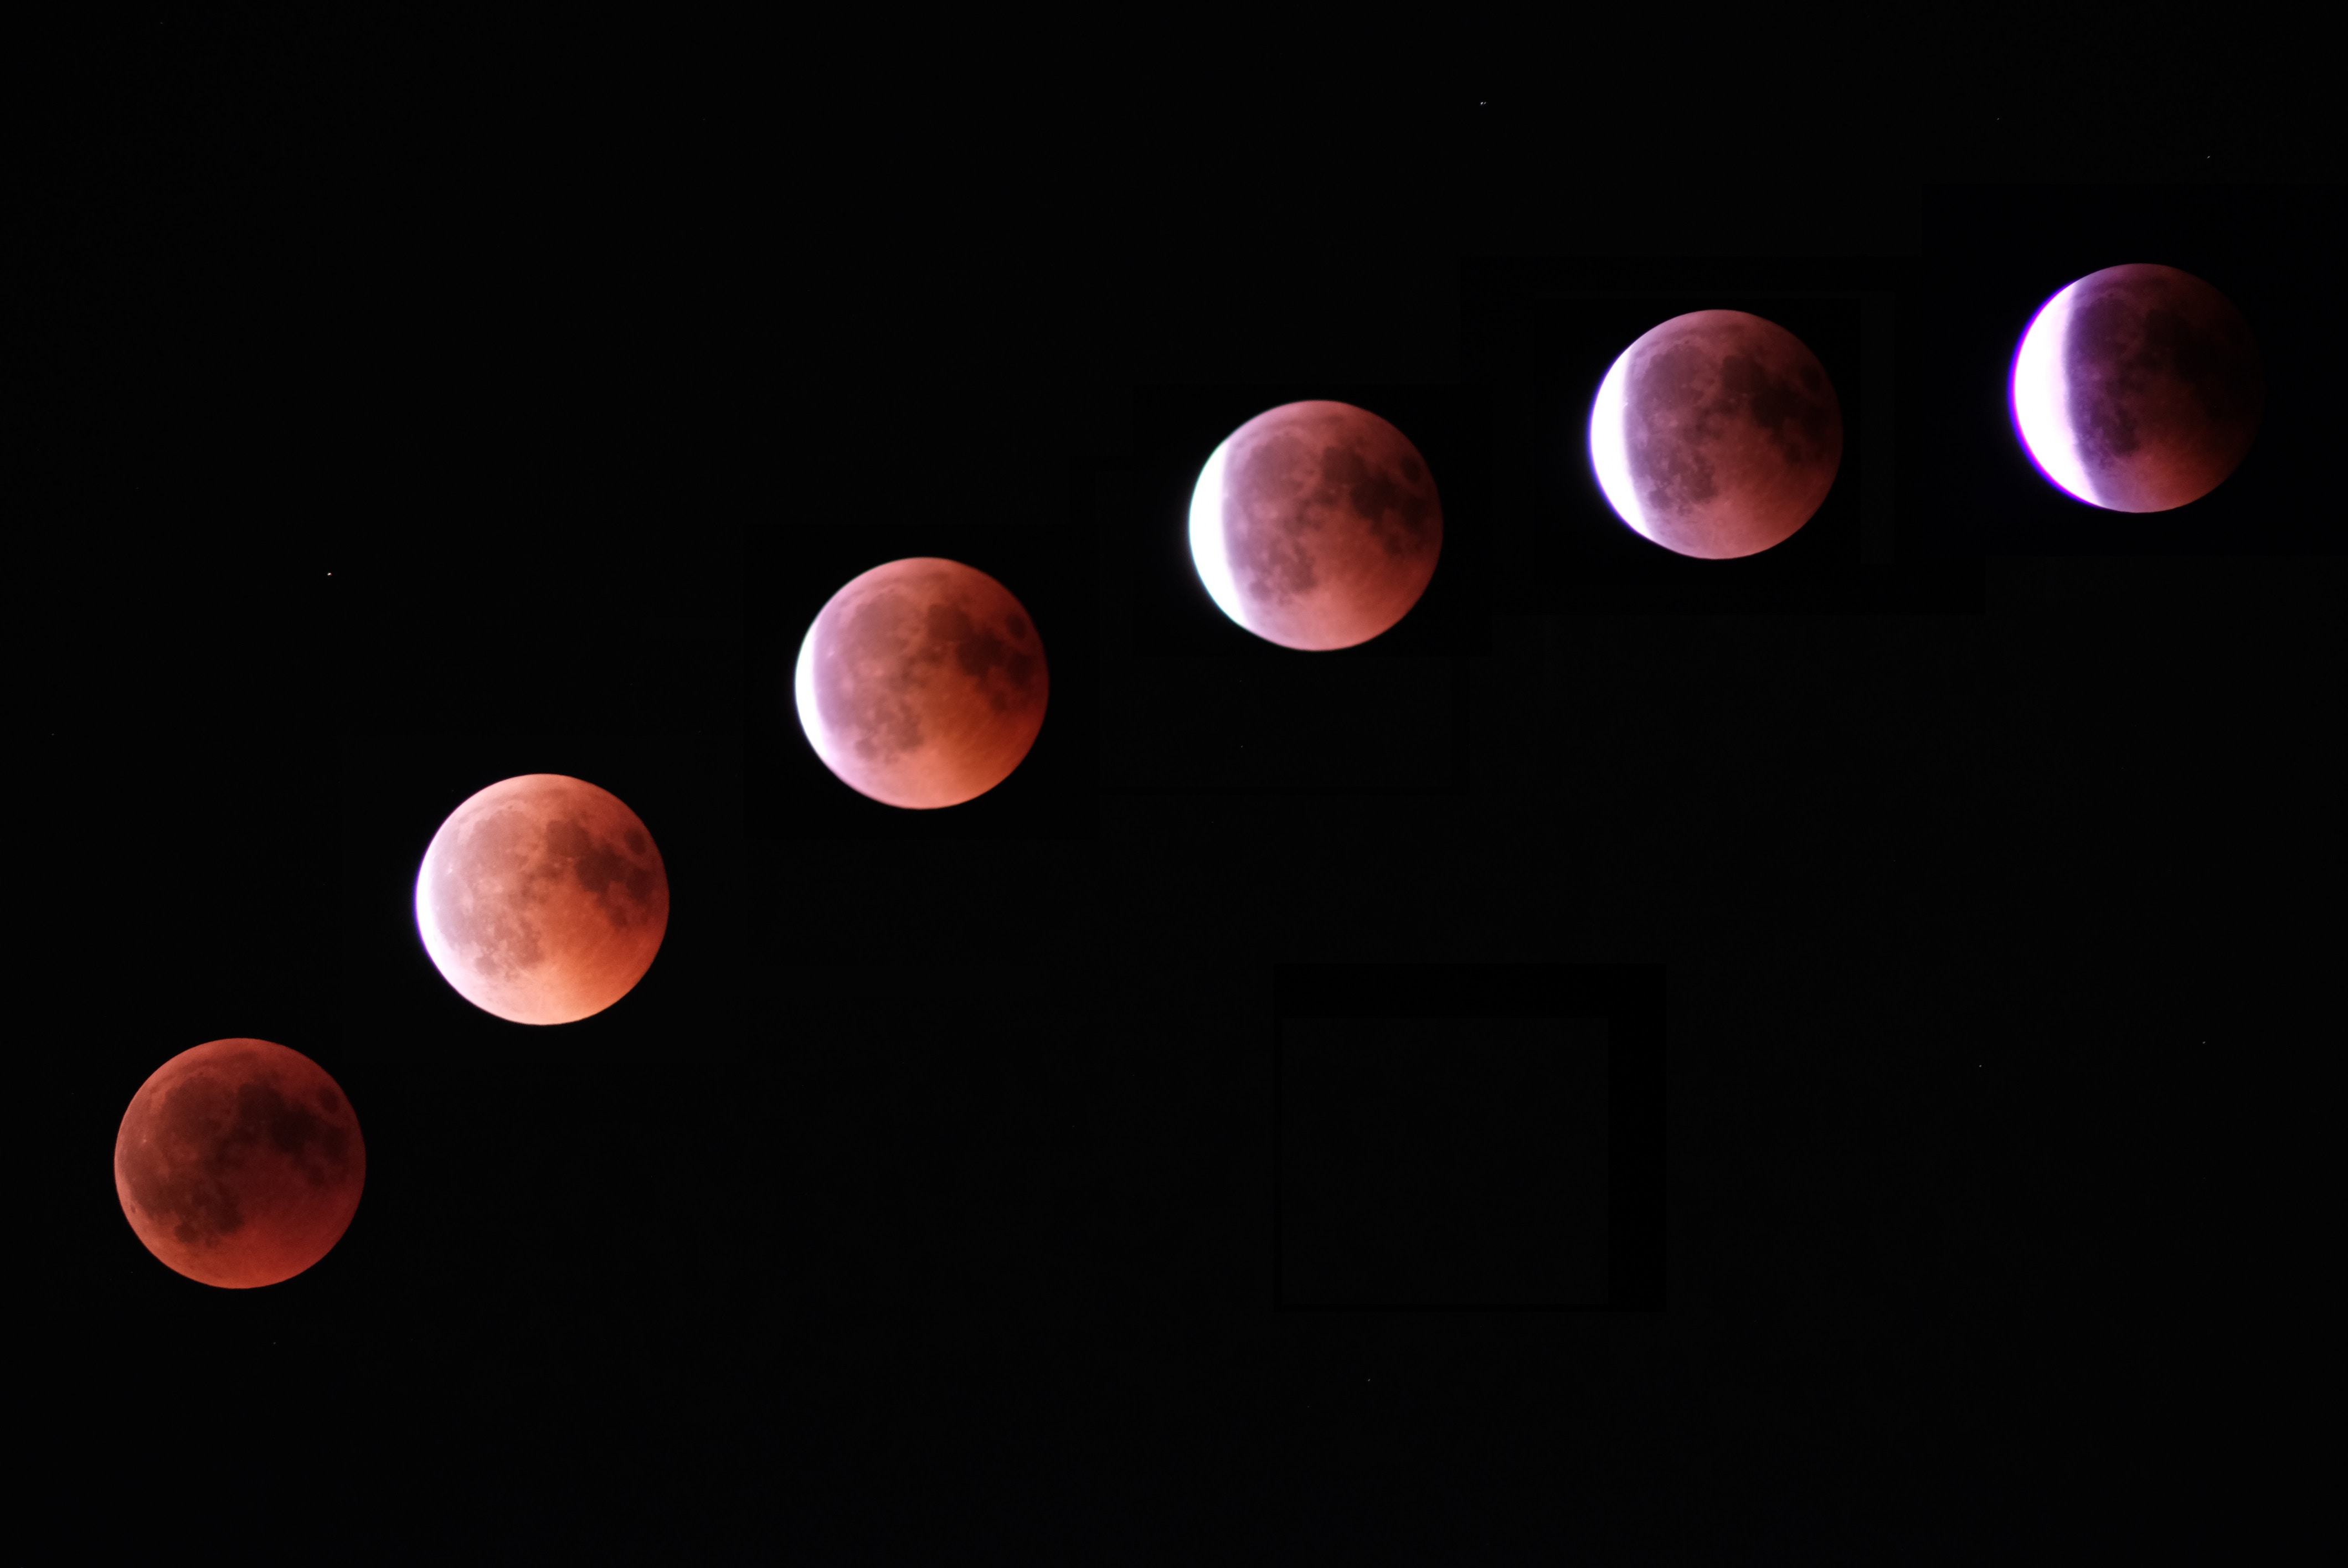 How To Watch The Rare Super Blood Wolf Moon Lunar Eclipse